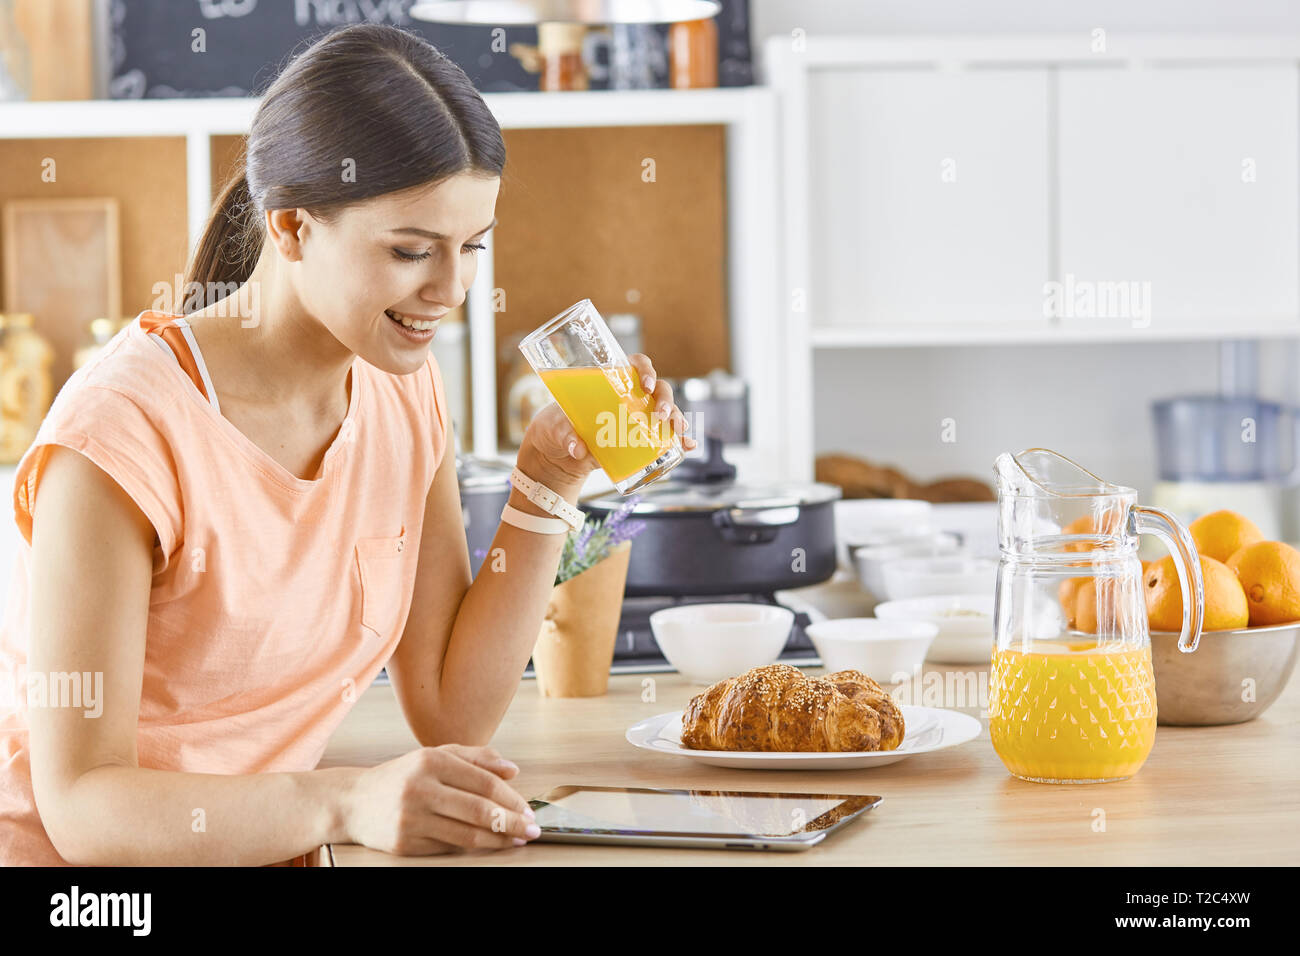 Smiling pretty woman looking at mobile phone and holding glass of orange juice while having breakfast in a kitchen. Stock Photo